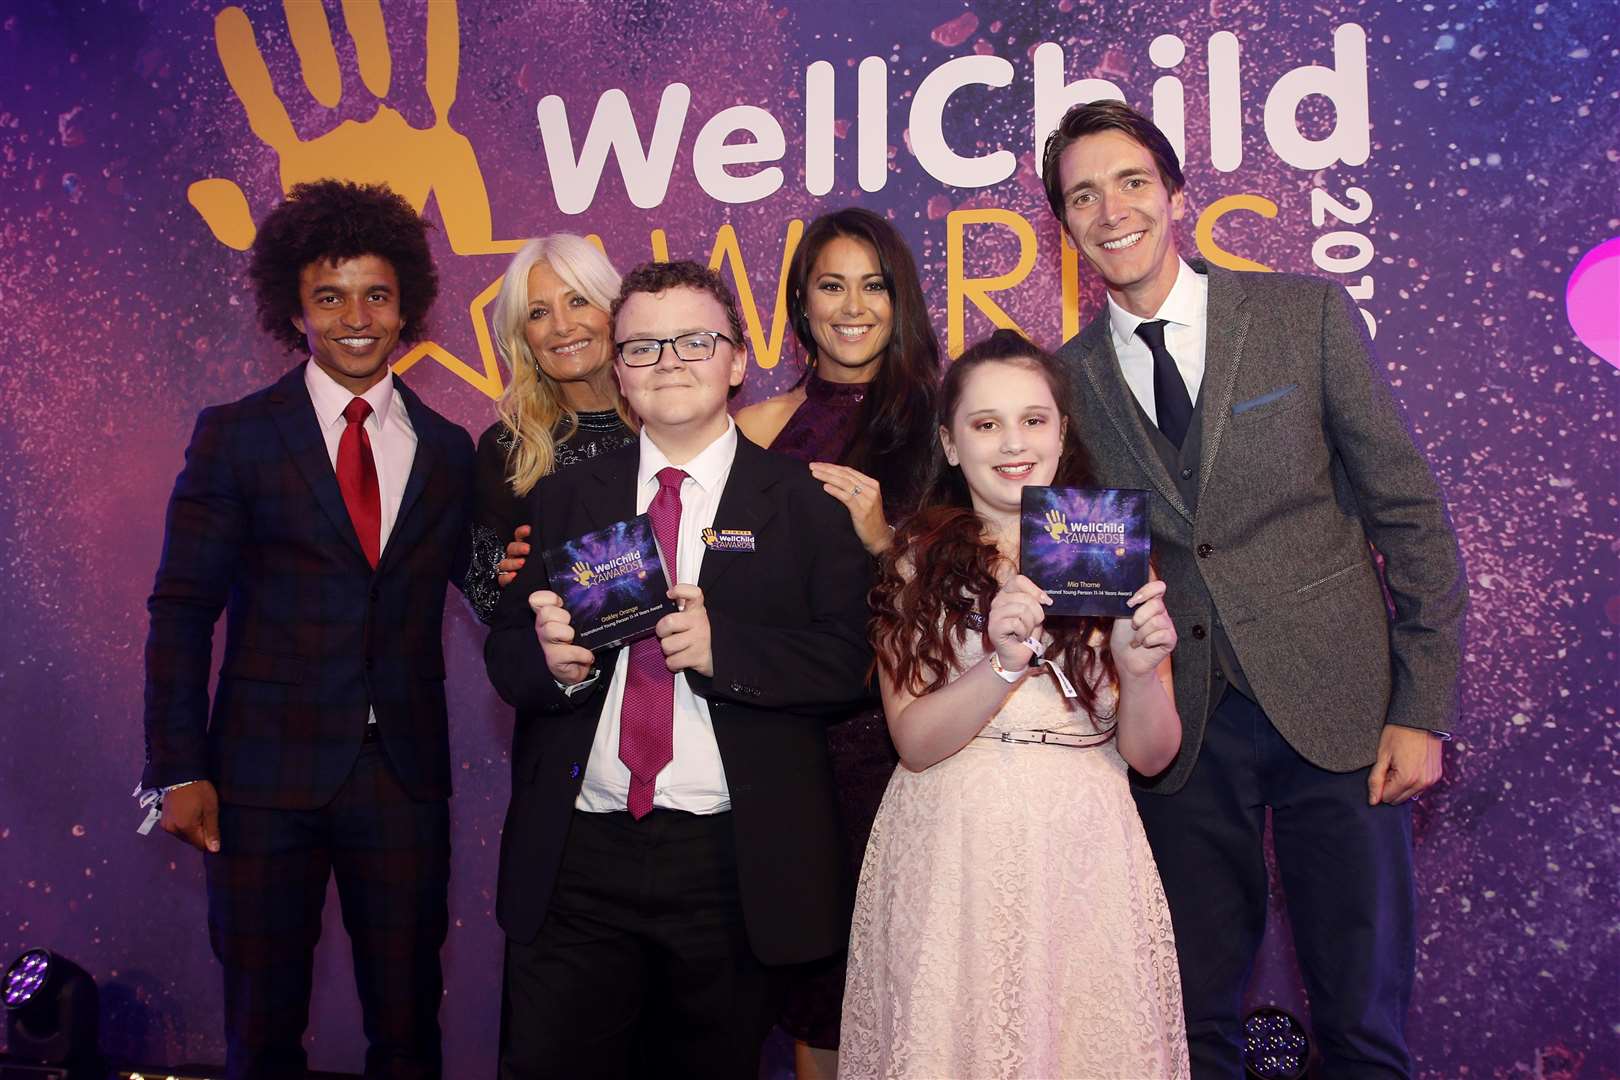 Oakley Orange with other winners. Pictures courtesy of WellChild Awards